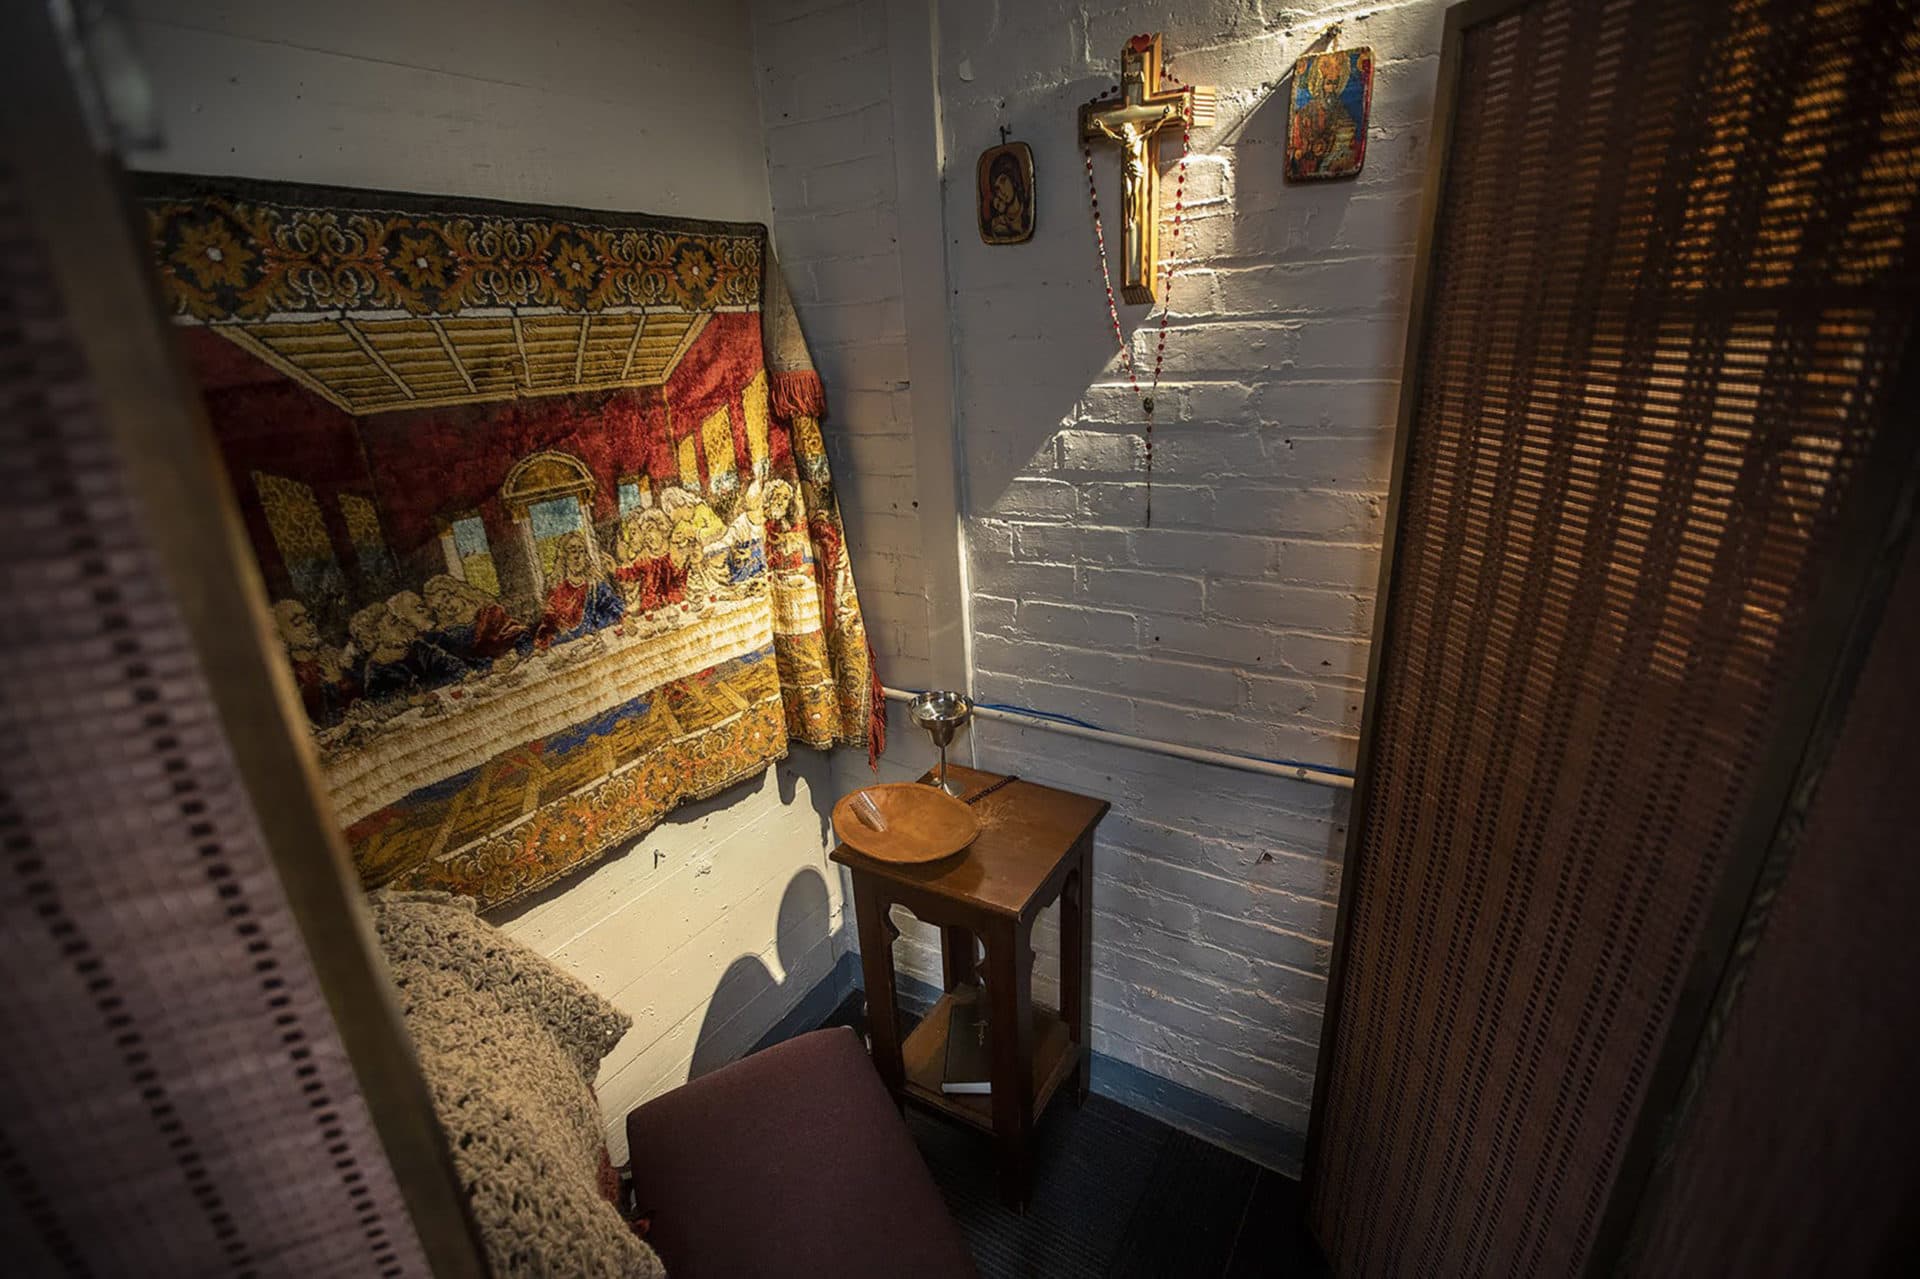 The prayer corner is the last holdover of the mission's chapel. (Jesse Costa/WBUR)